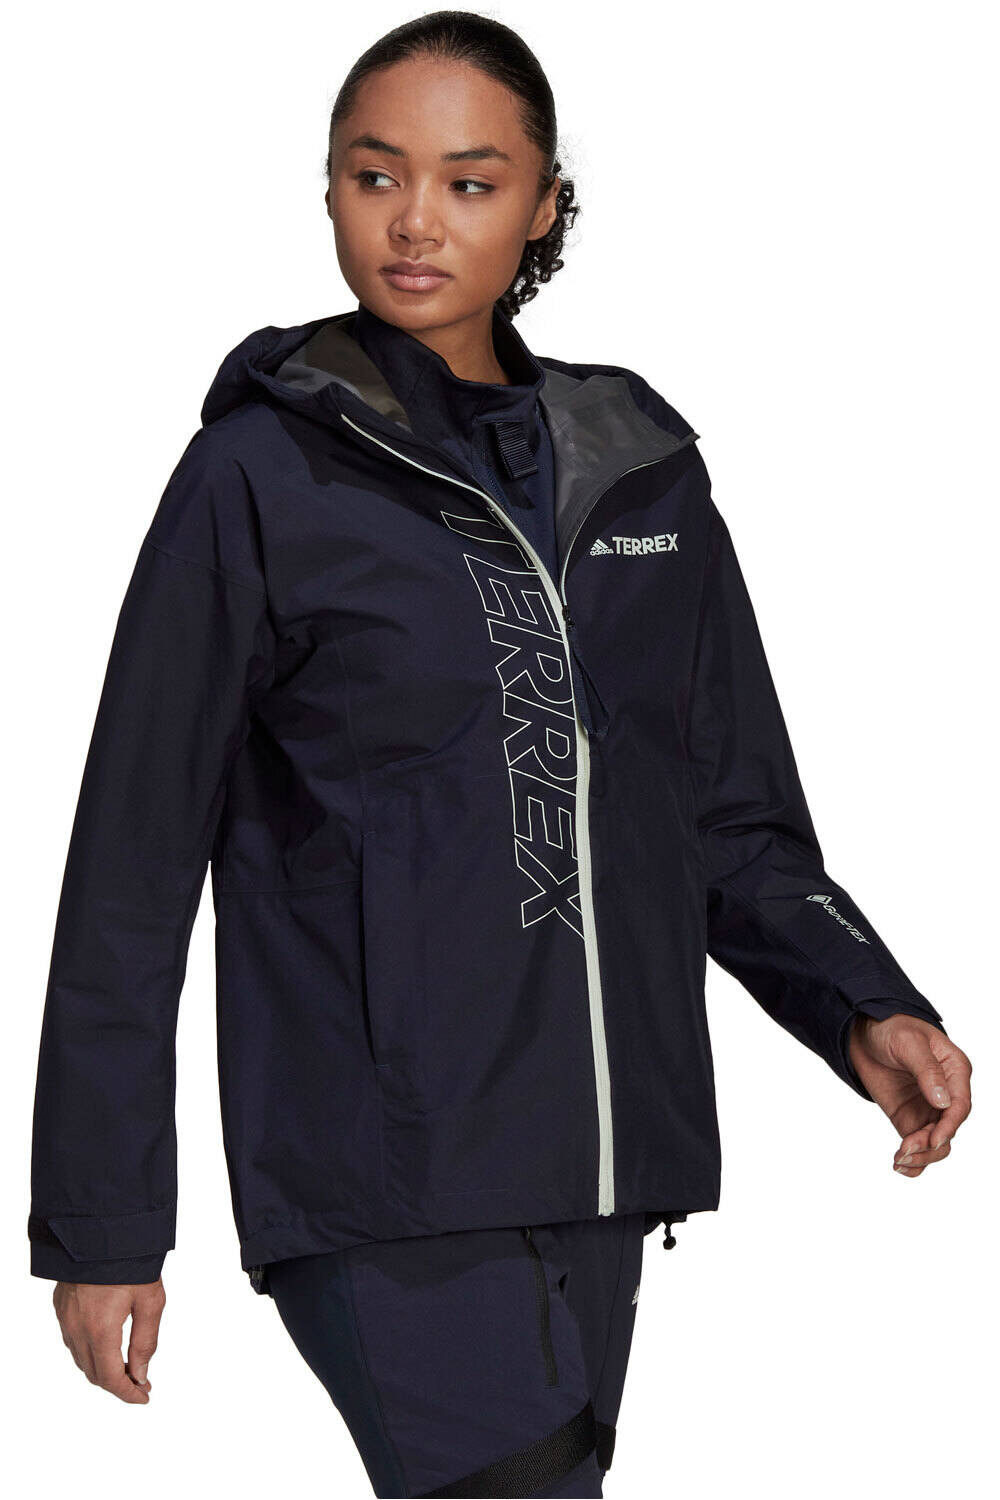 adidas chaqueta impermeable mujer Terrex GORE-TEX Paclite impermeable 06